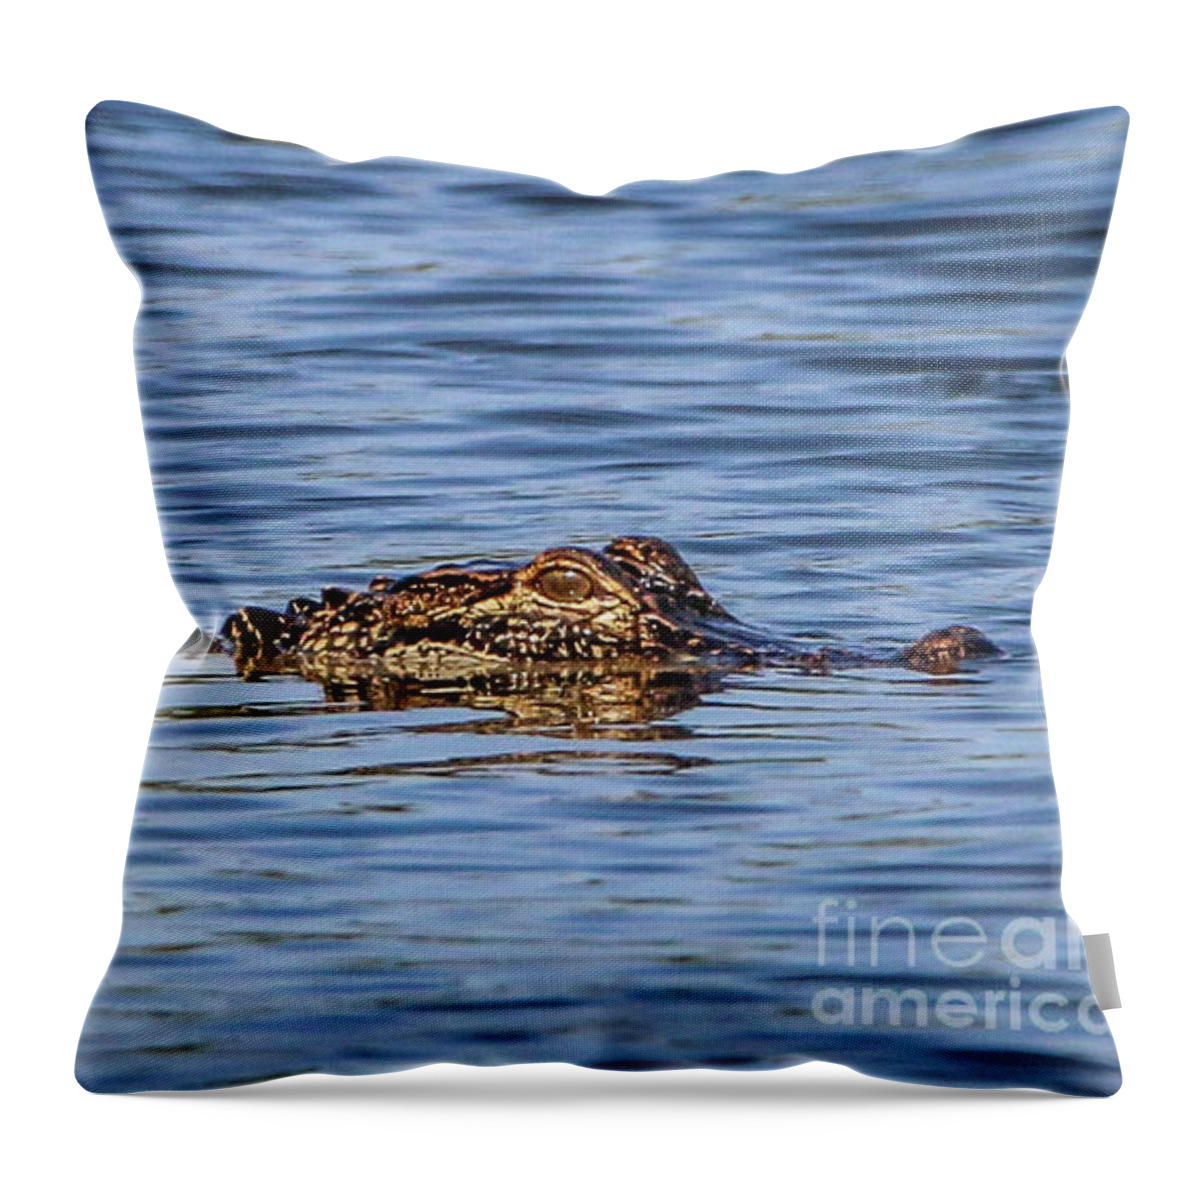 Gator Throw Pillow featuring the photograph Floating Gator by Tom Claud